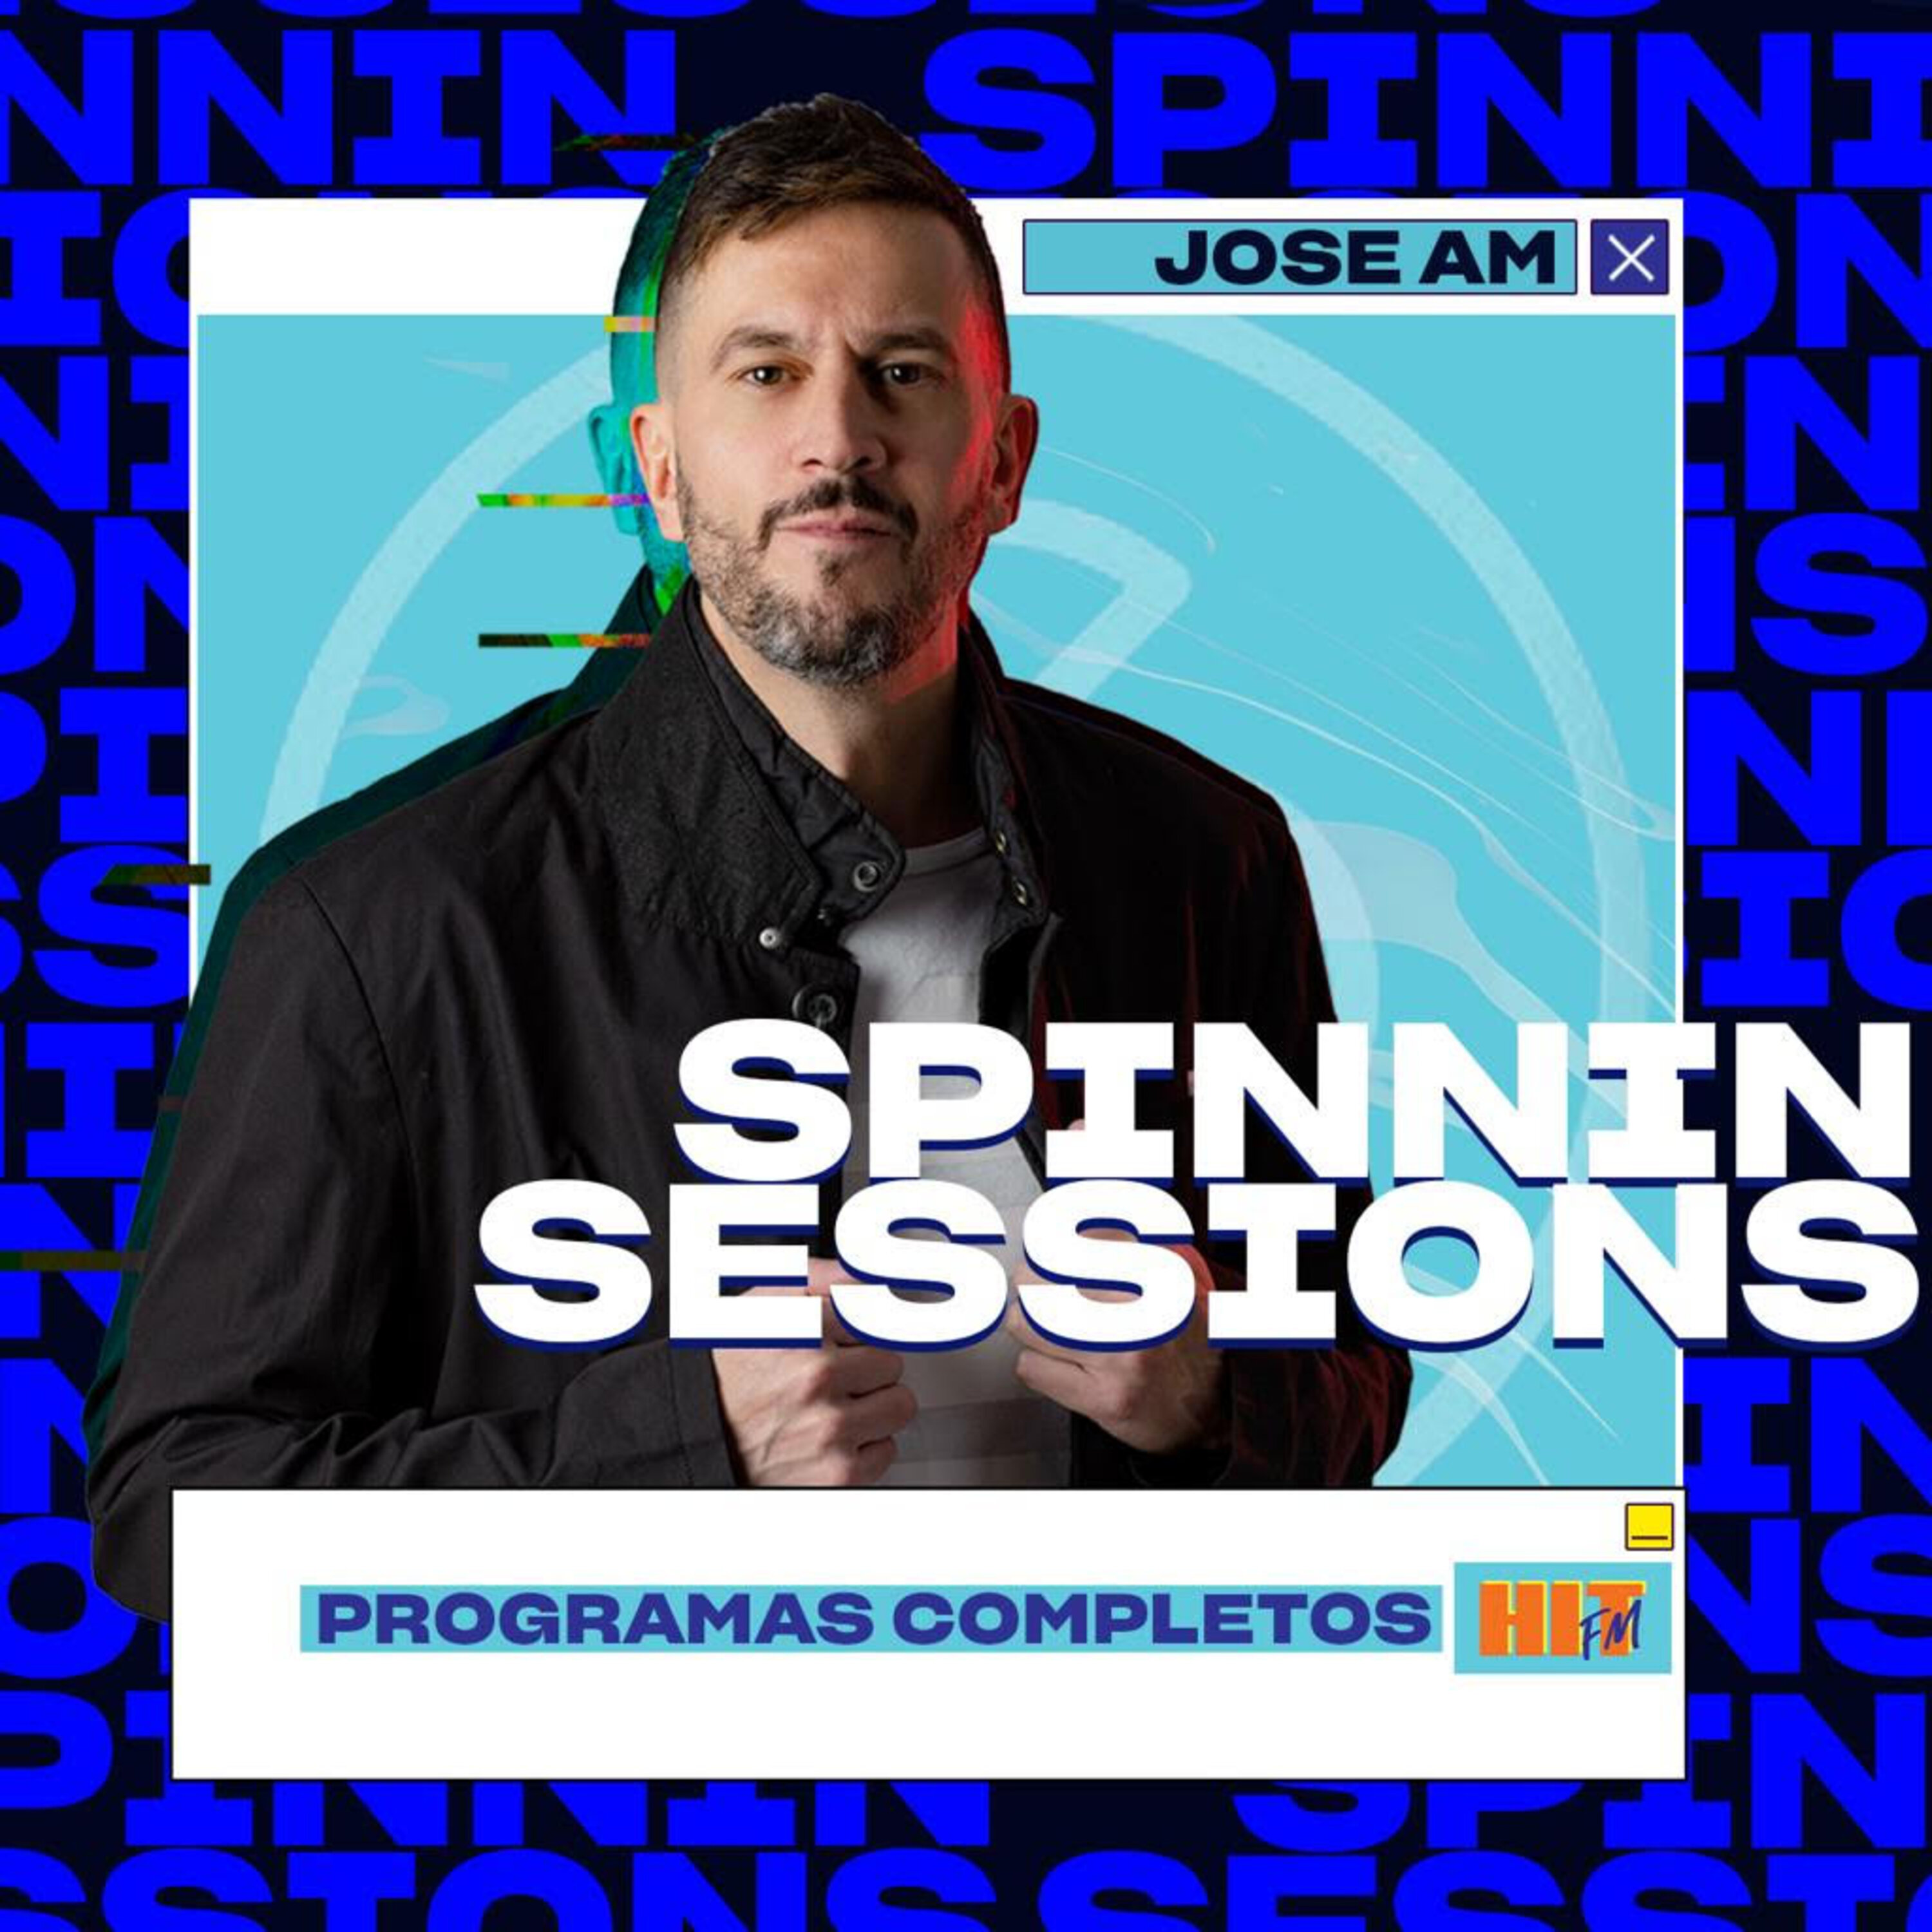 Spinnin Sessions con Jose AM (28/08/2022)